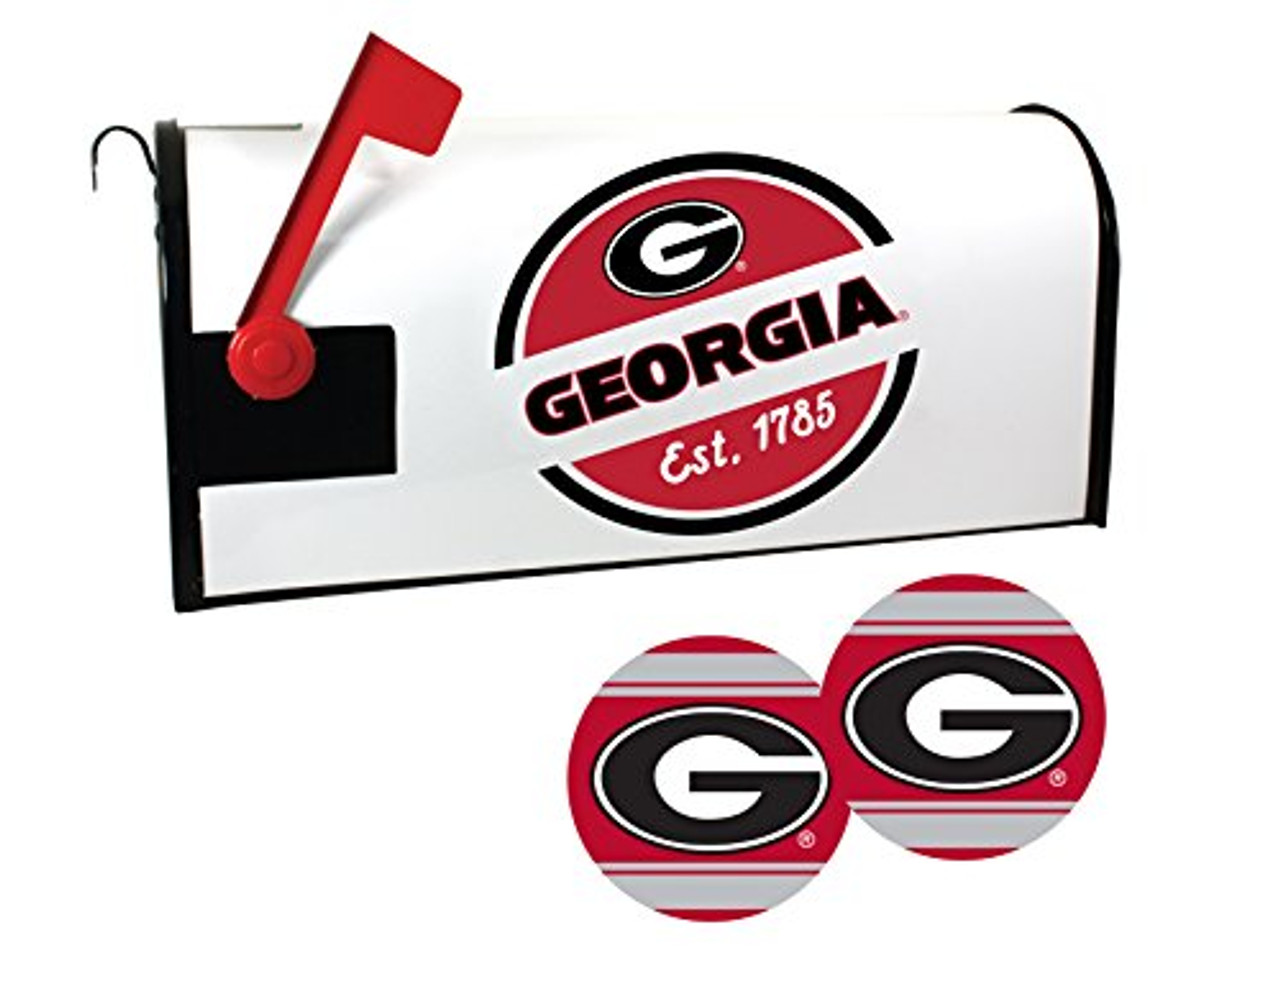 Georgia Bulldogs Magnetic Mailbox Cover and Sticker Set